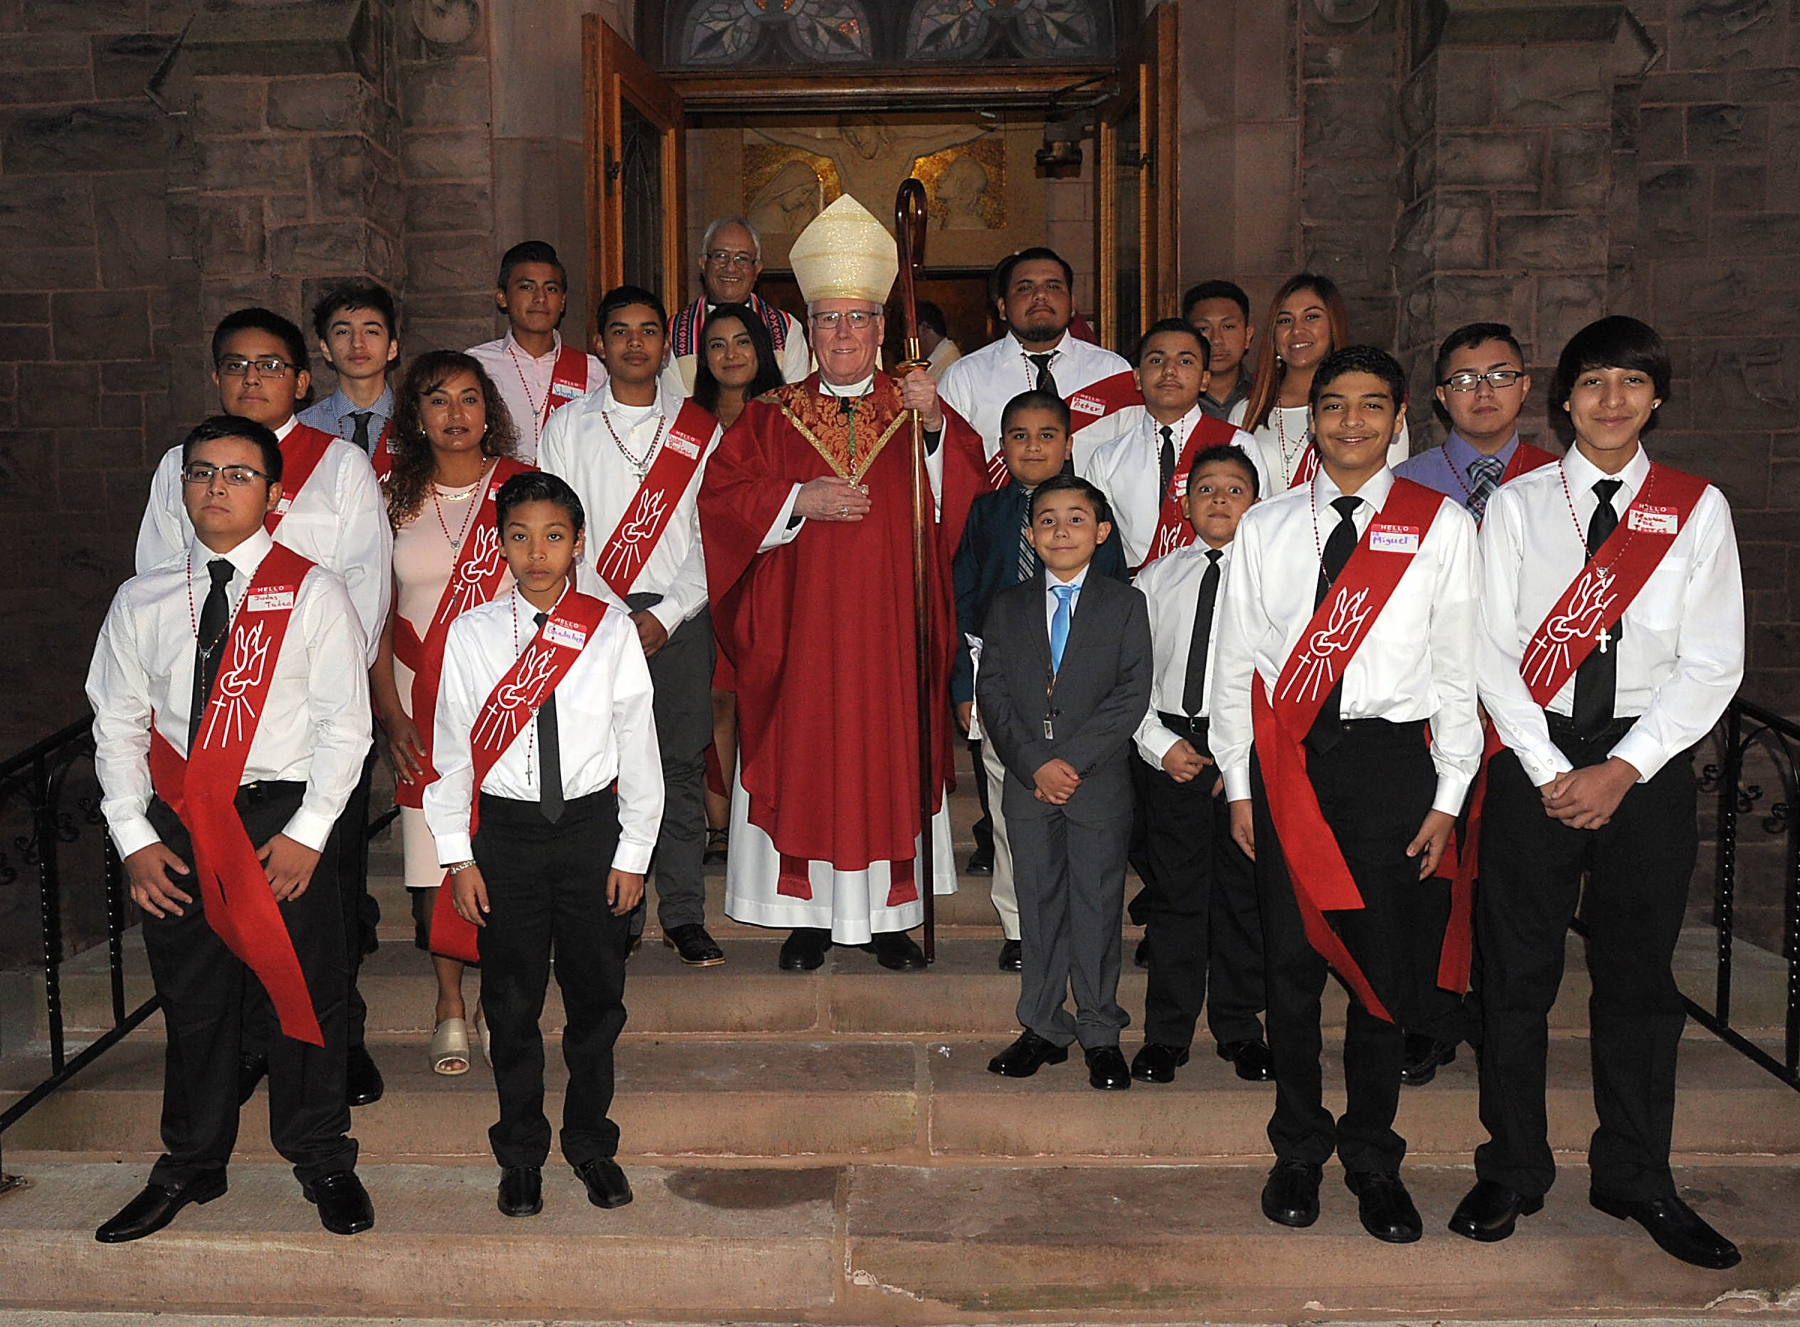 Bishop Richard J. Malone stands with Confirmation candidates at Holy Family Parish, 106 South Main Street, Albion. The students' parents are migrant farm workers. The Mass was said in both English and Spanish.
Dan Cappellazzo/Staff photographer
